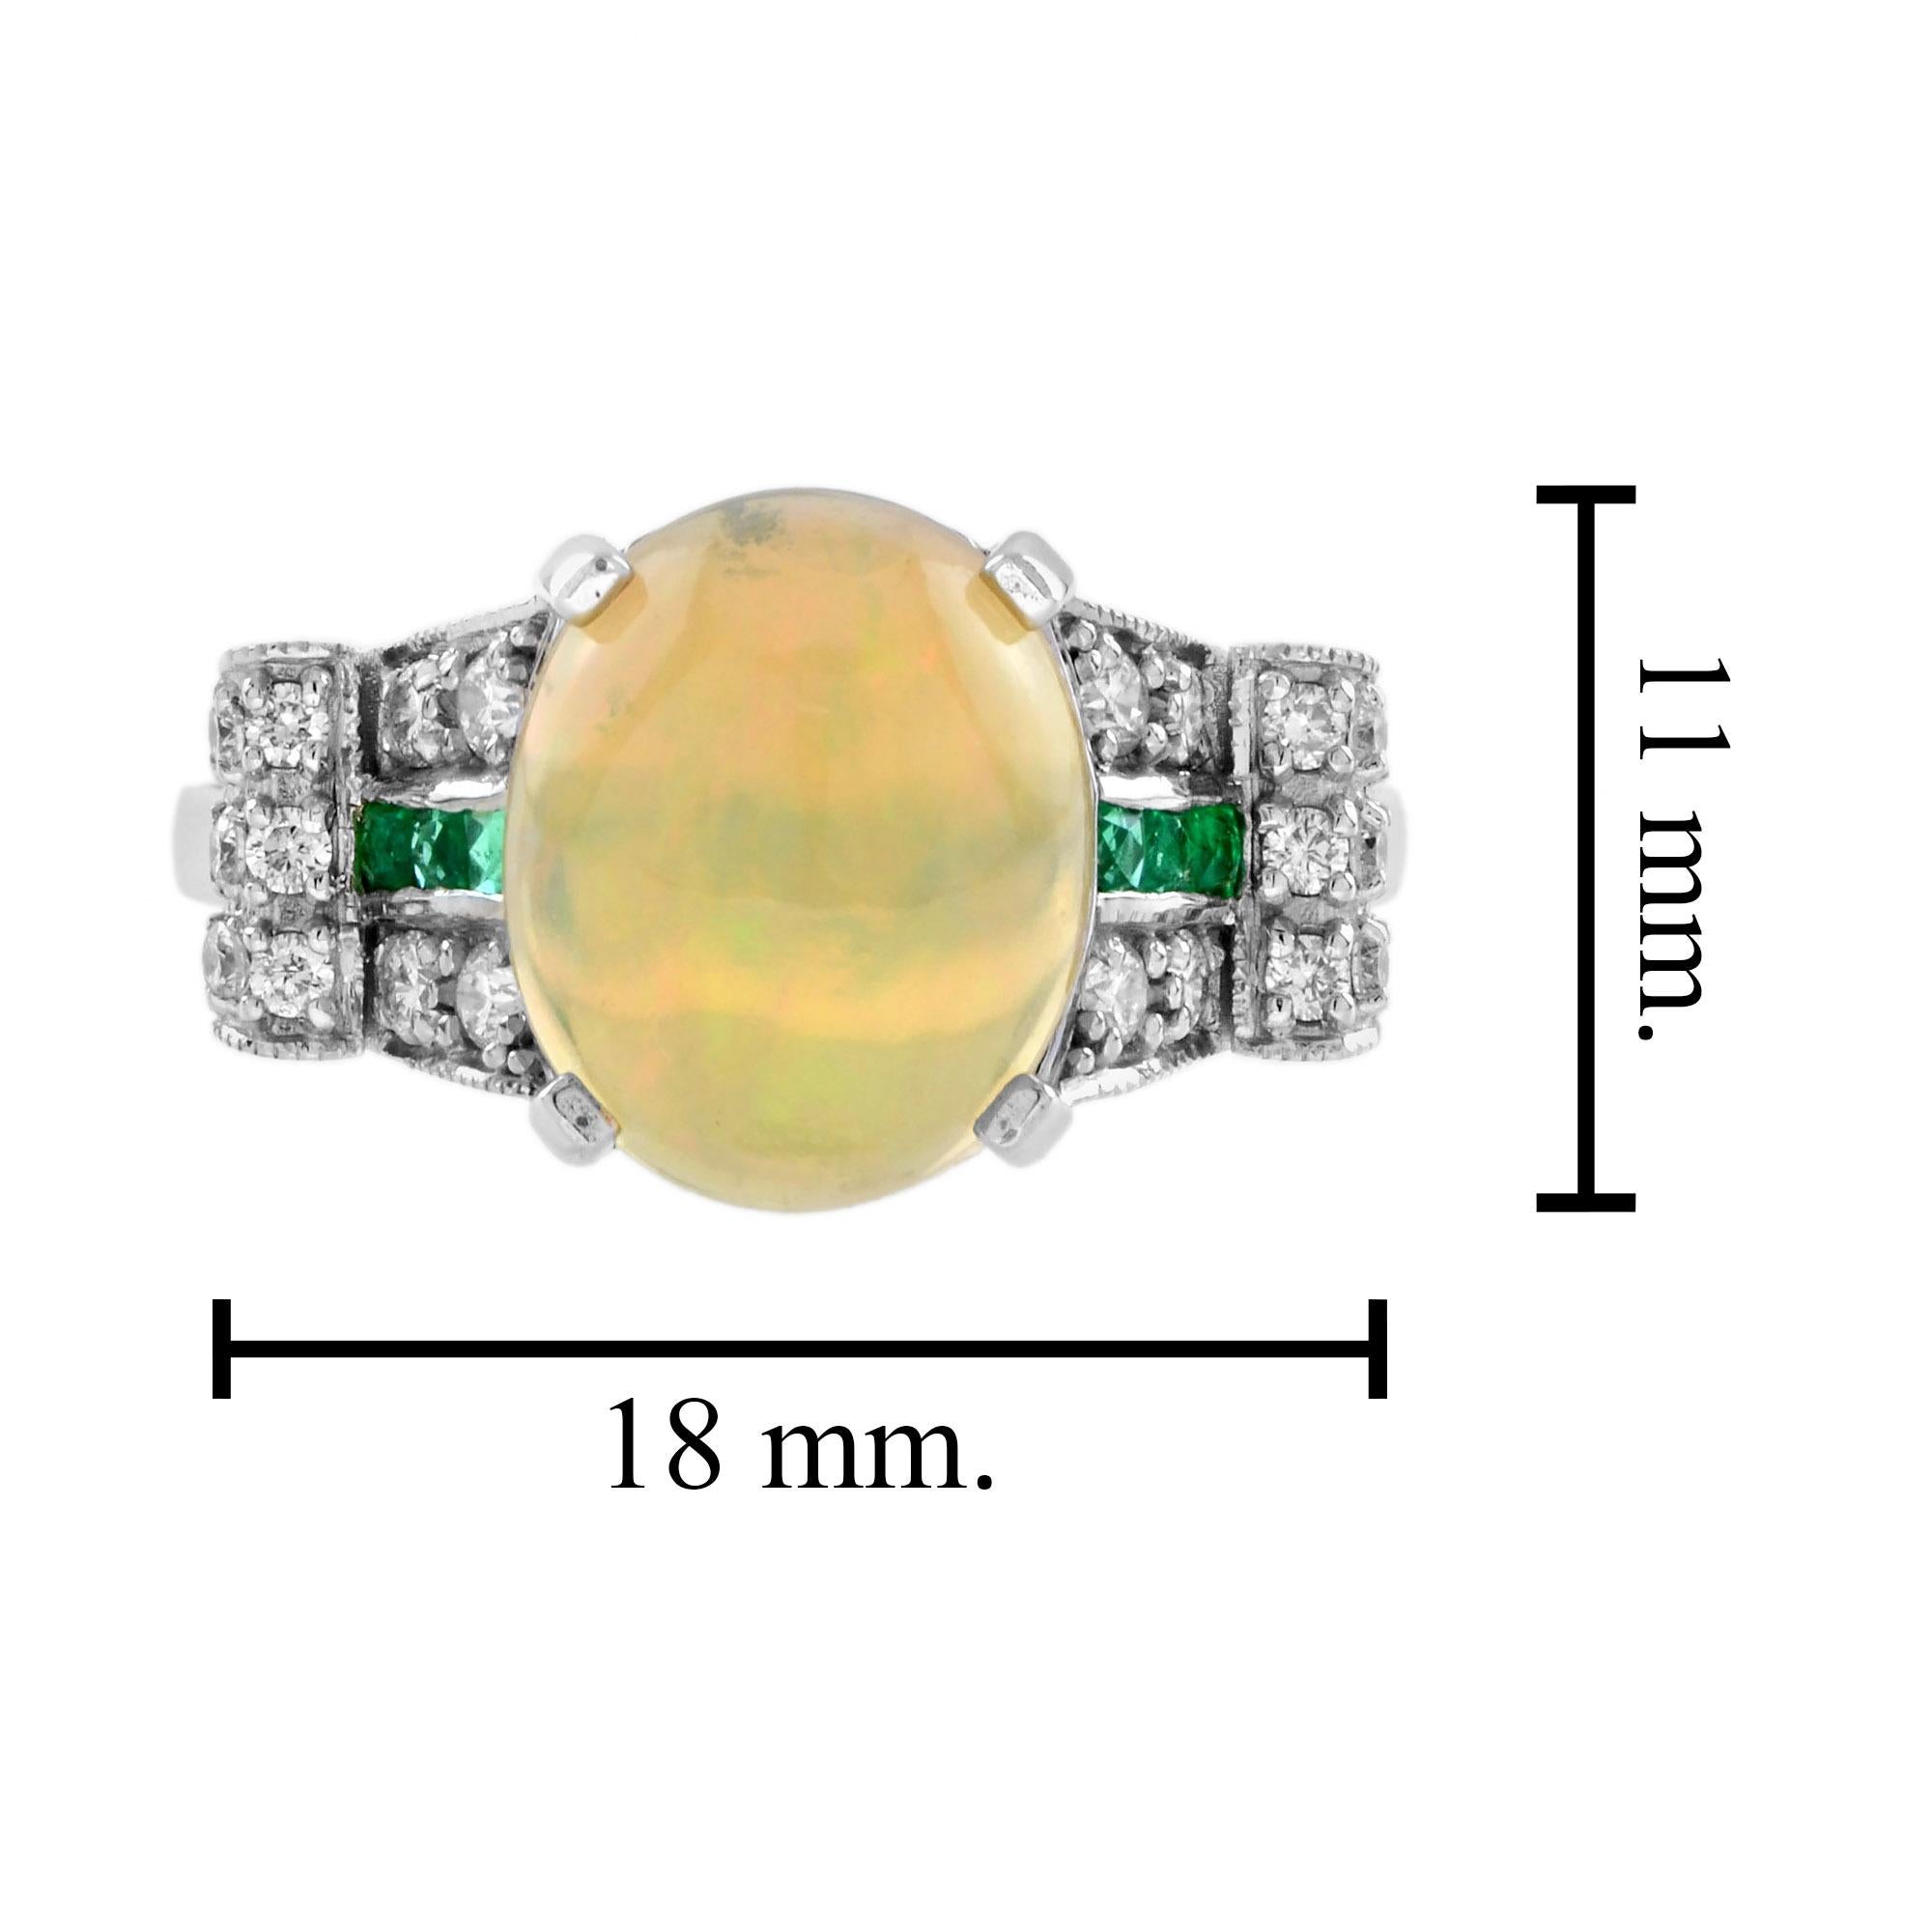 2.46 Ct. Opal Emerald Diamond Art Deco Style Solitaire Ring in 14K White Gold For Sale 3